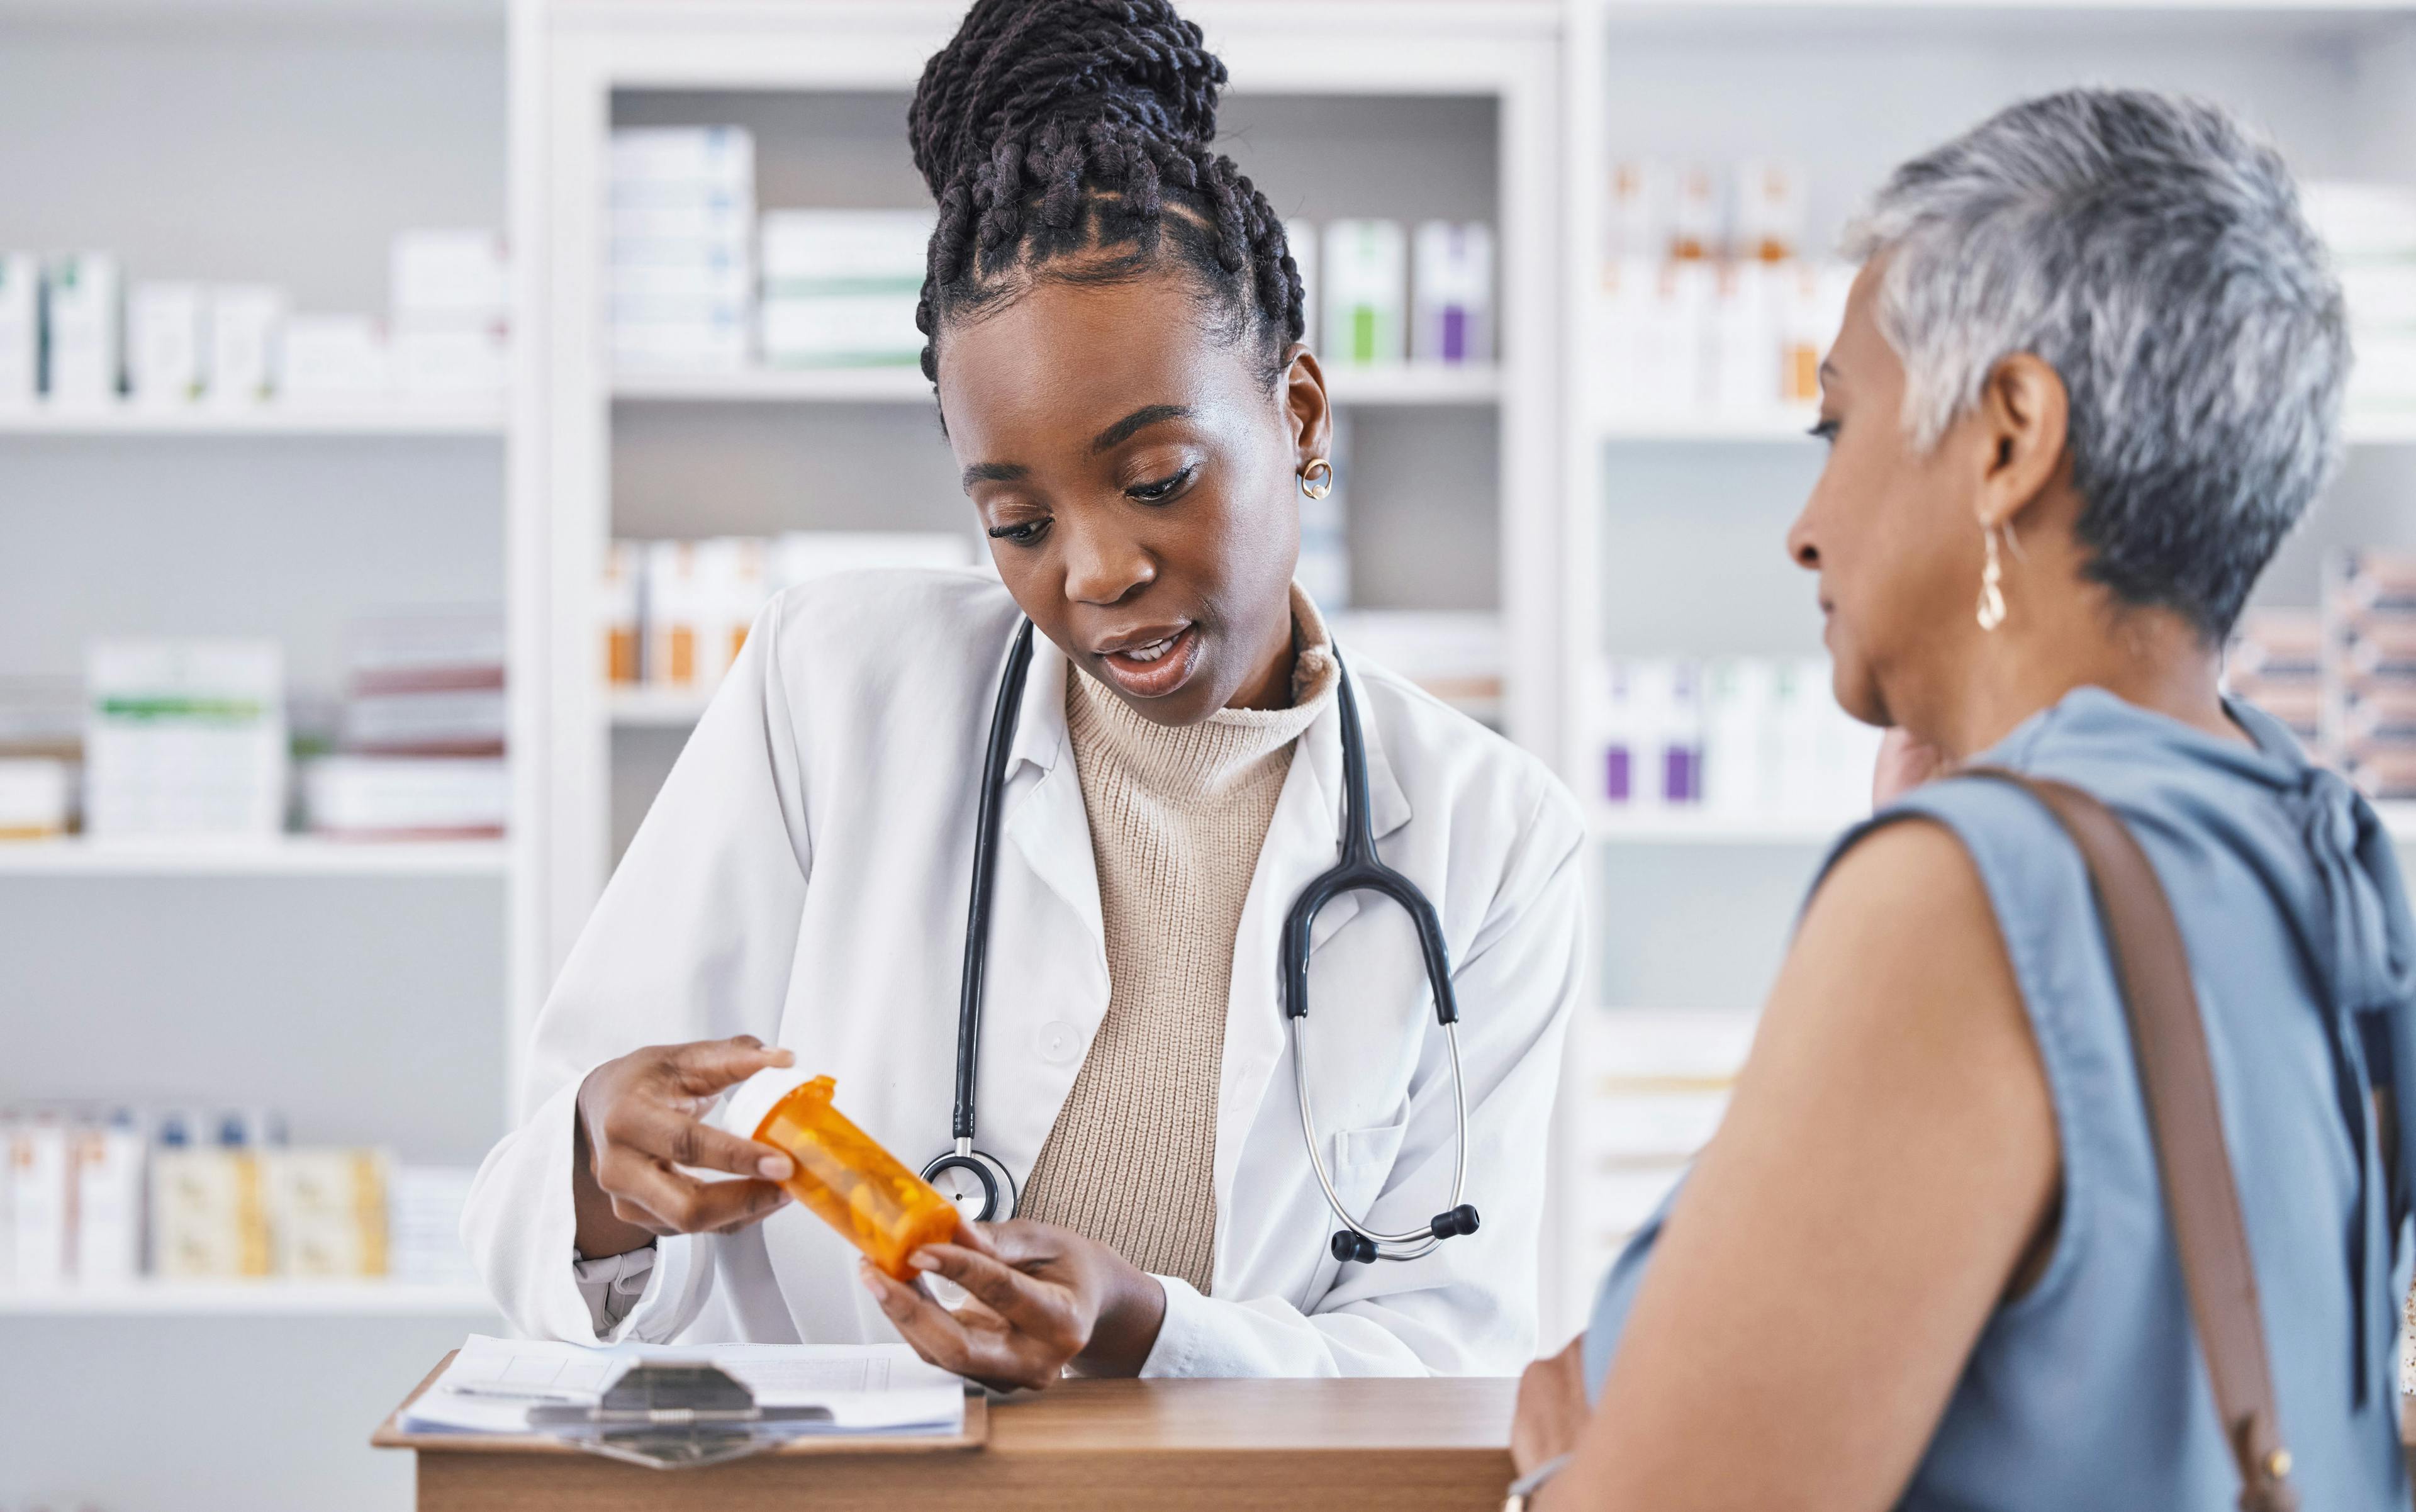 Pharmacist communicating with patient about medication / C. Davids/peopleimages.com - stock.adobe.com